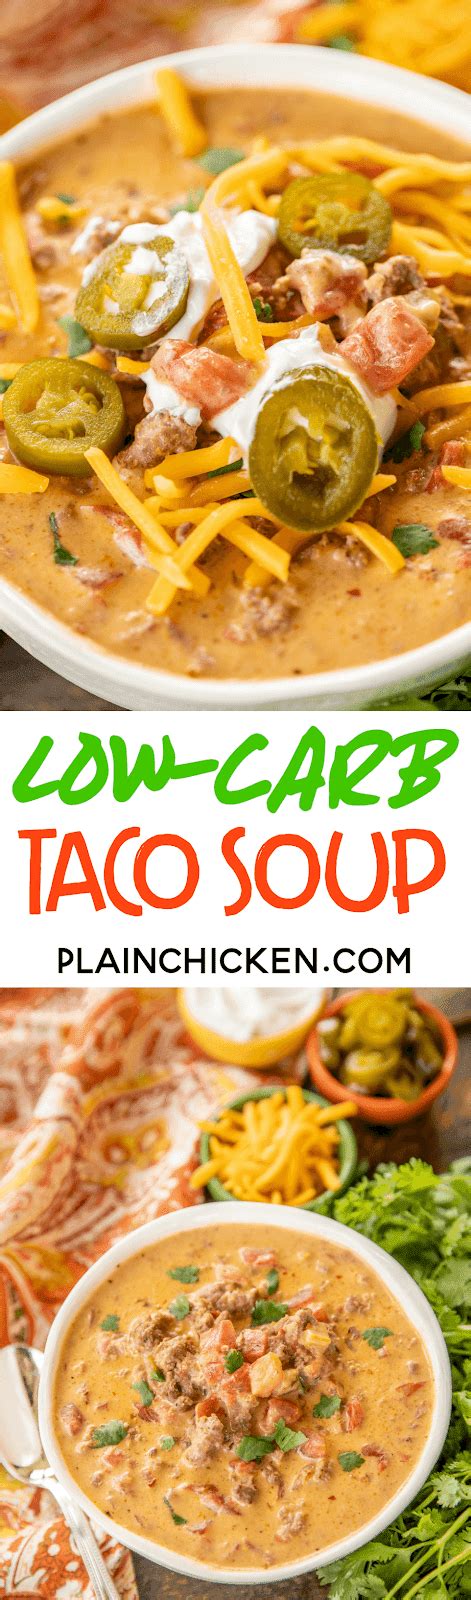 Cover and cook on low for 4 hours. Low-Carb Taco Soup - Plain Chicken